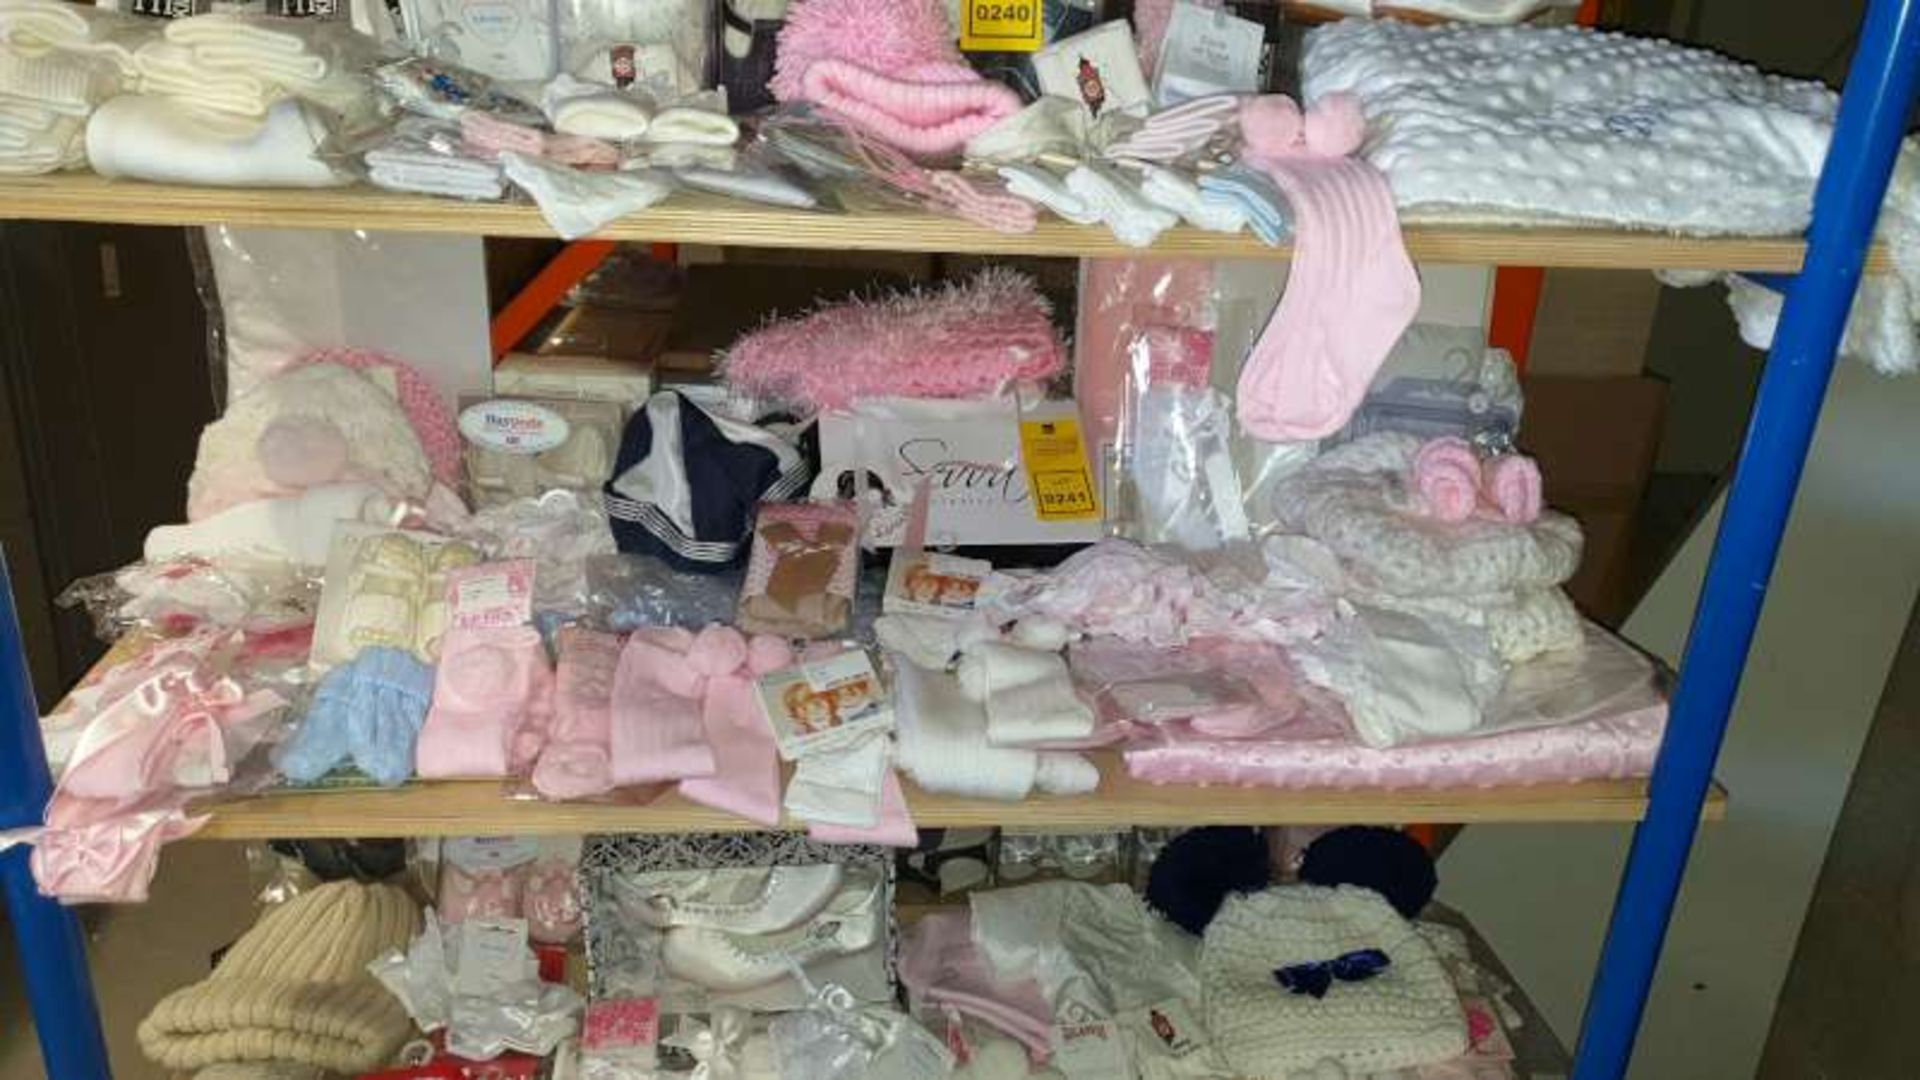 SHELF CONTAINING CHILDRENS CLOTHING AND ACCESSORIES IN VARIOUS STYLES AND SIZES